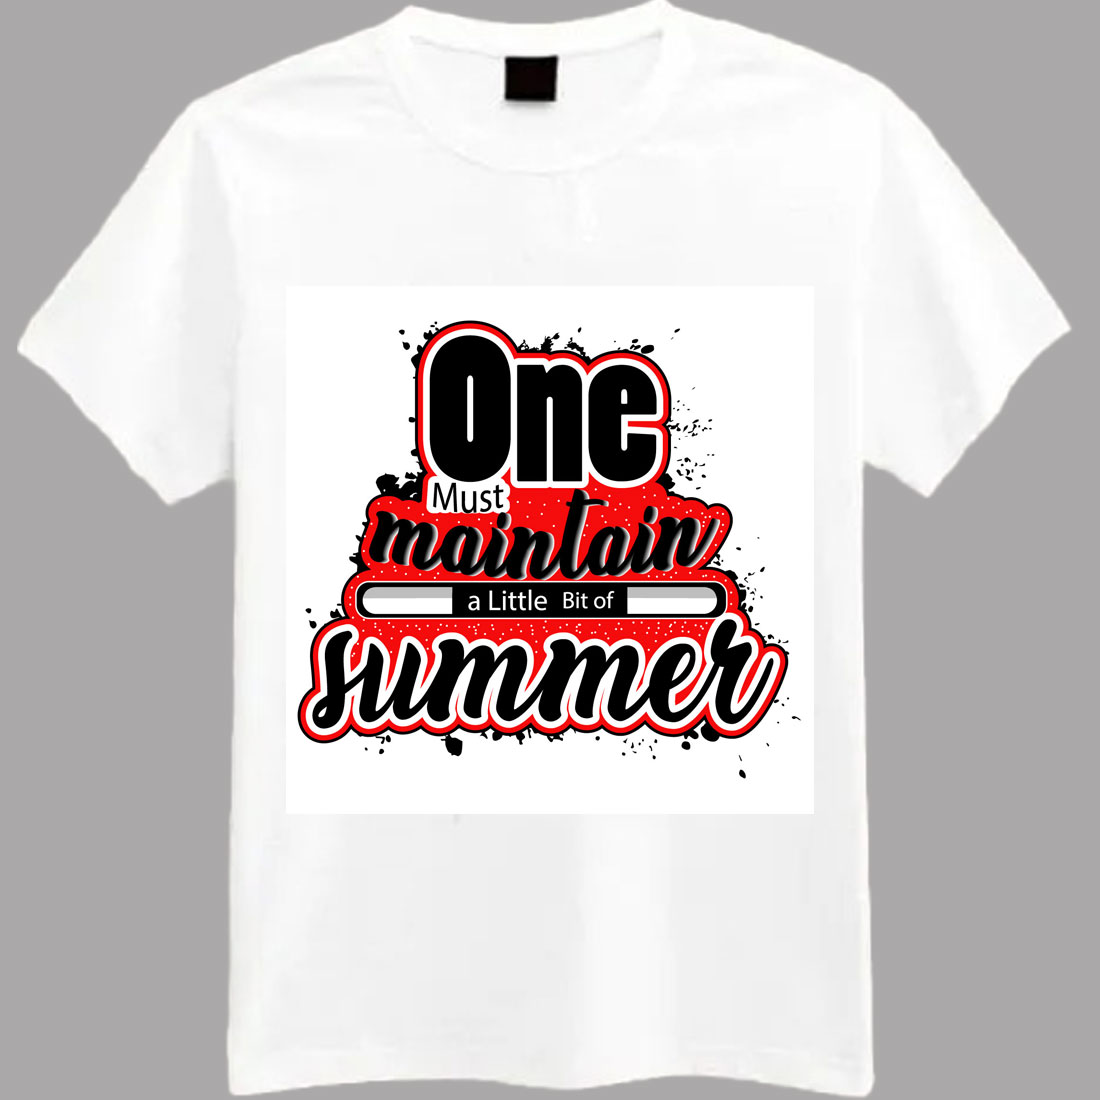 Regular trendy t-shirts design for updated students and men/women preview image.